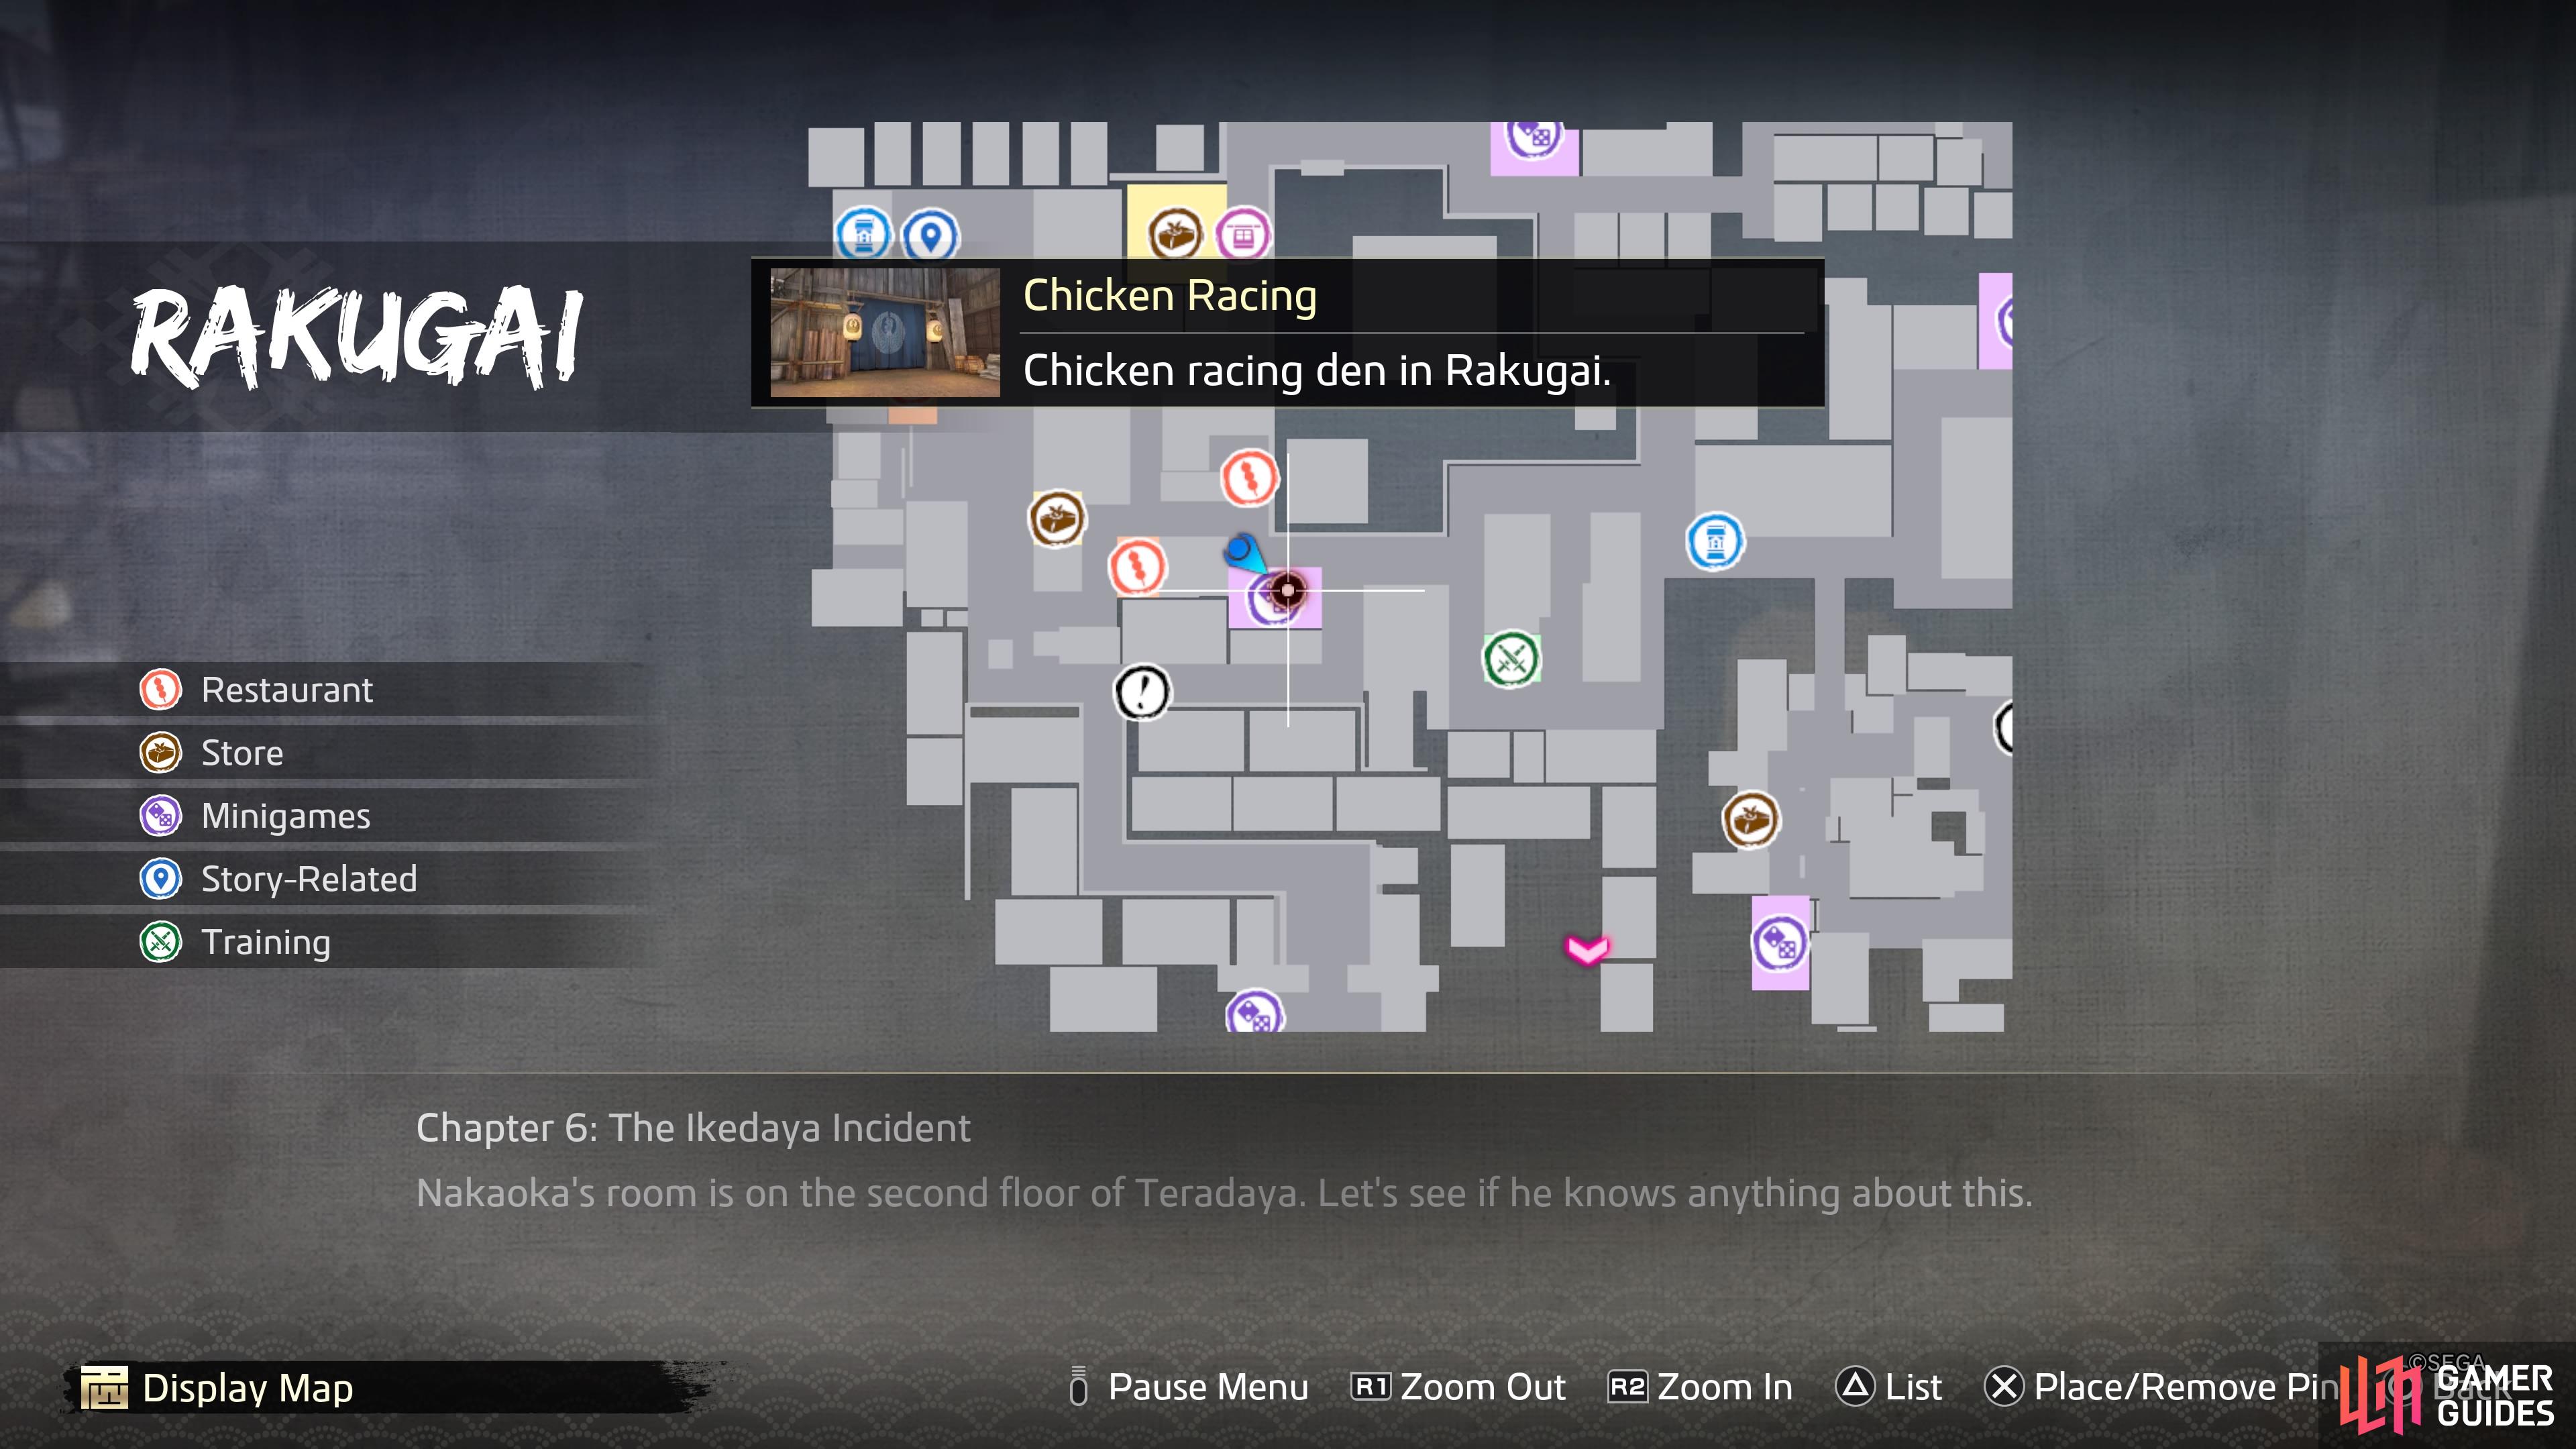 The location of the Chicken Racing minigame on the map